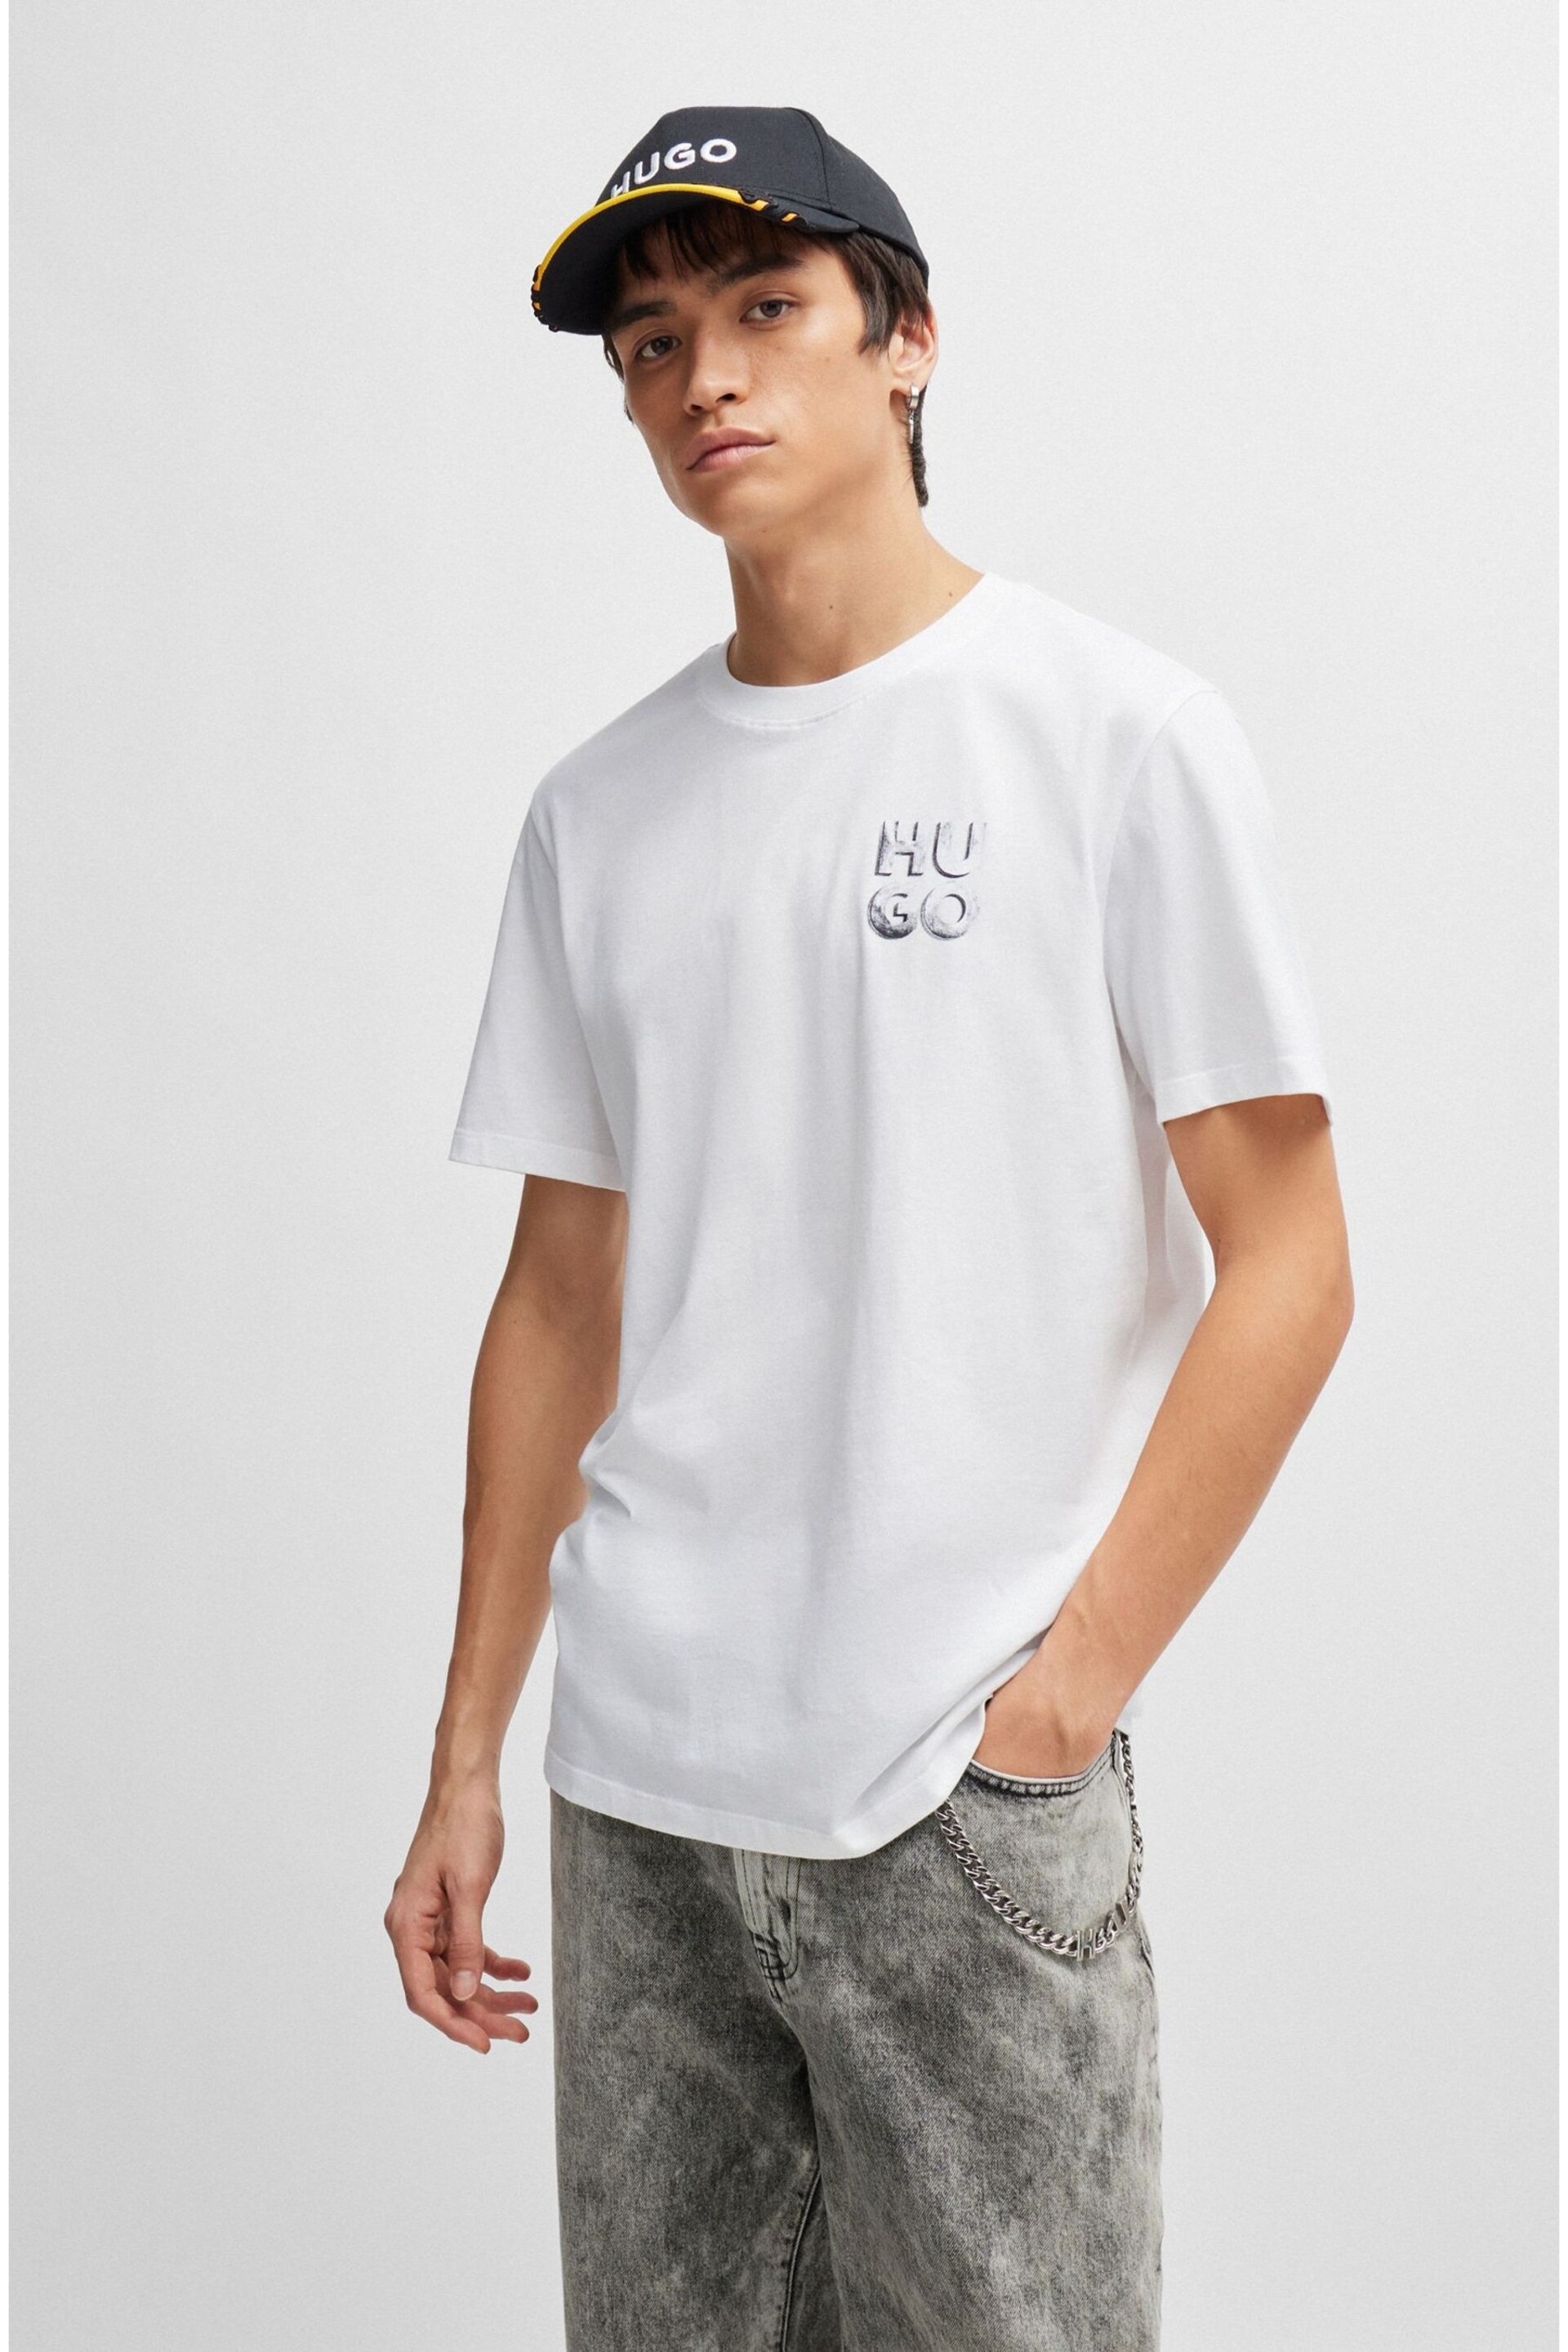 HUGO Relaxed Fit Reflective Logo T-Shirt - Image 1 of 5